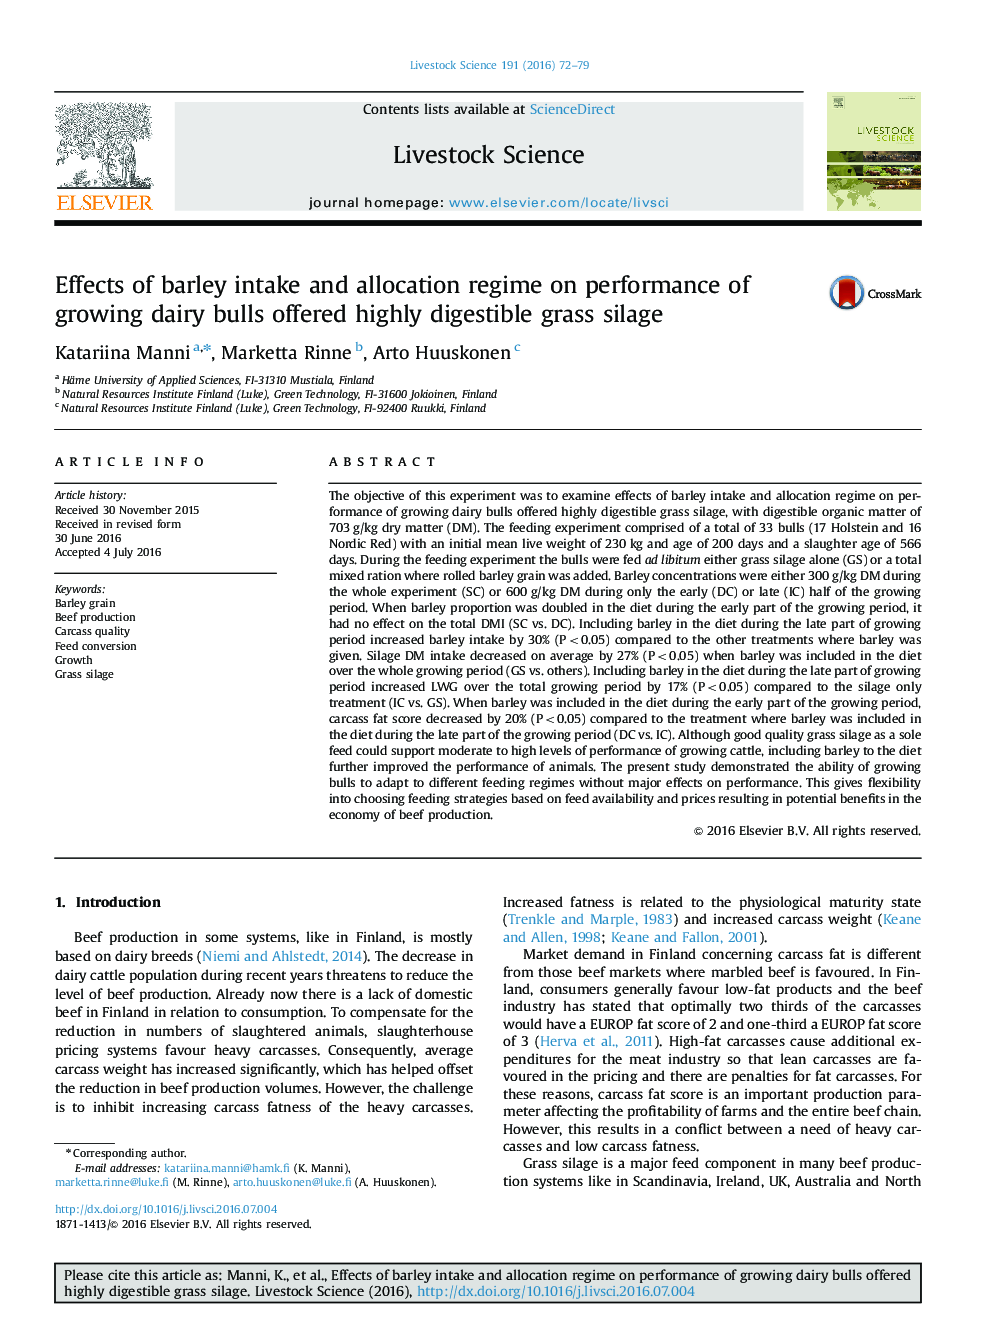 Effects of barley intake and allocation regime on performance of growing dairy bulls offered highly digestible grass silage